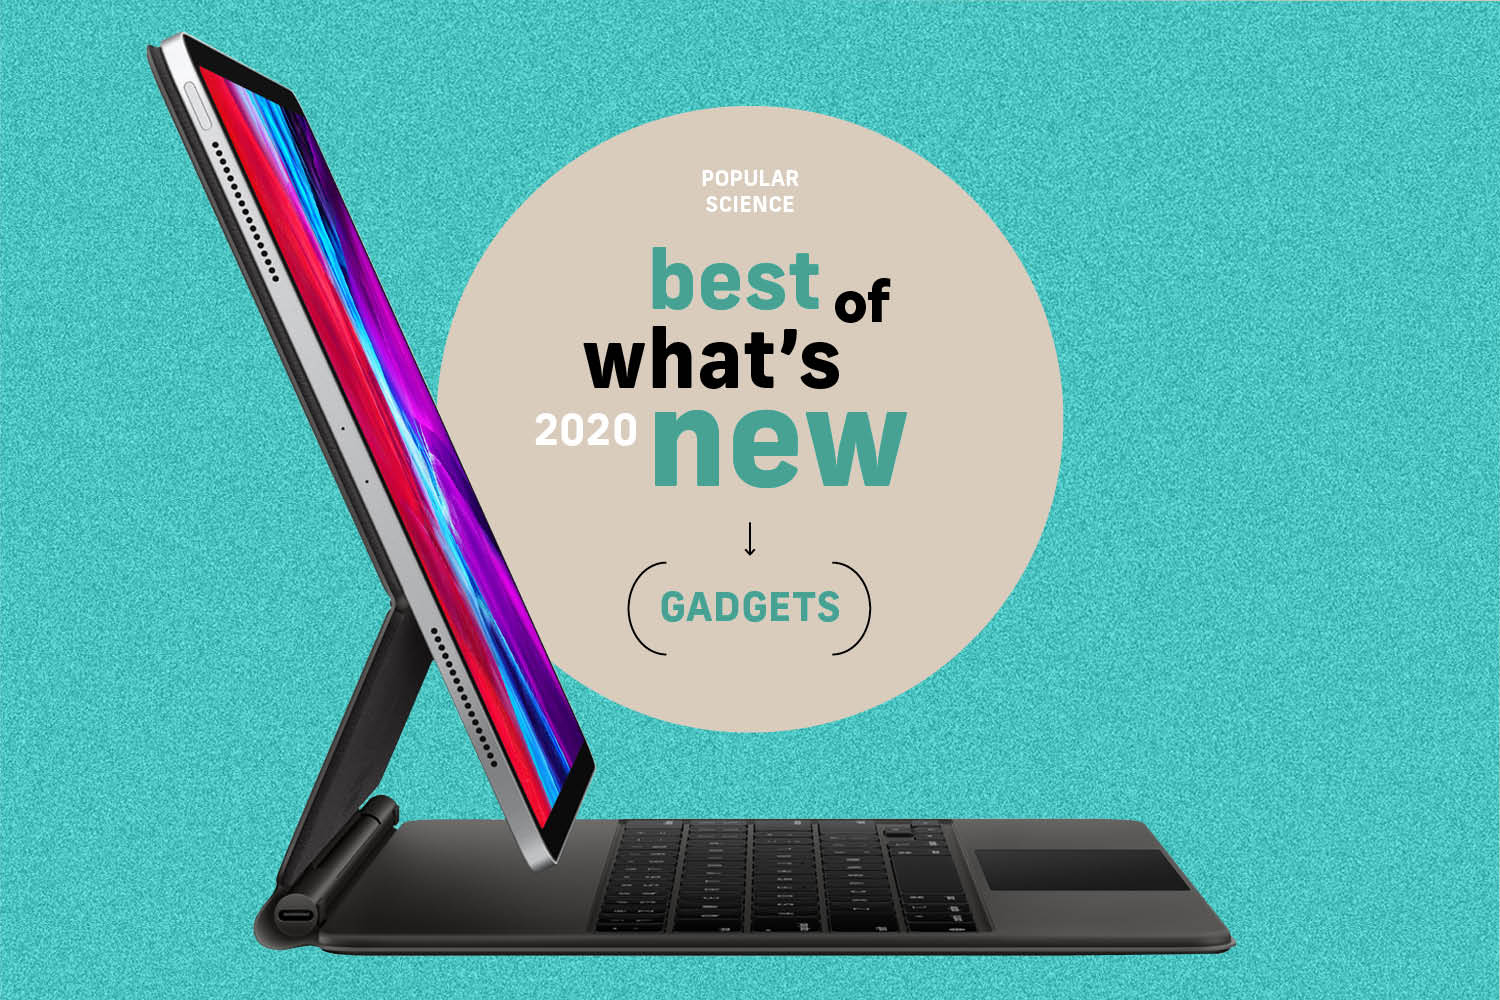 The 11 best new gadgets of 2020